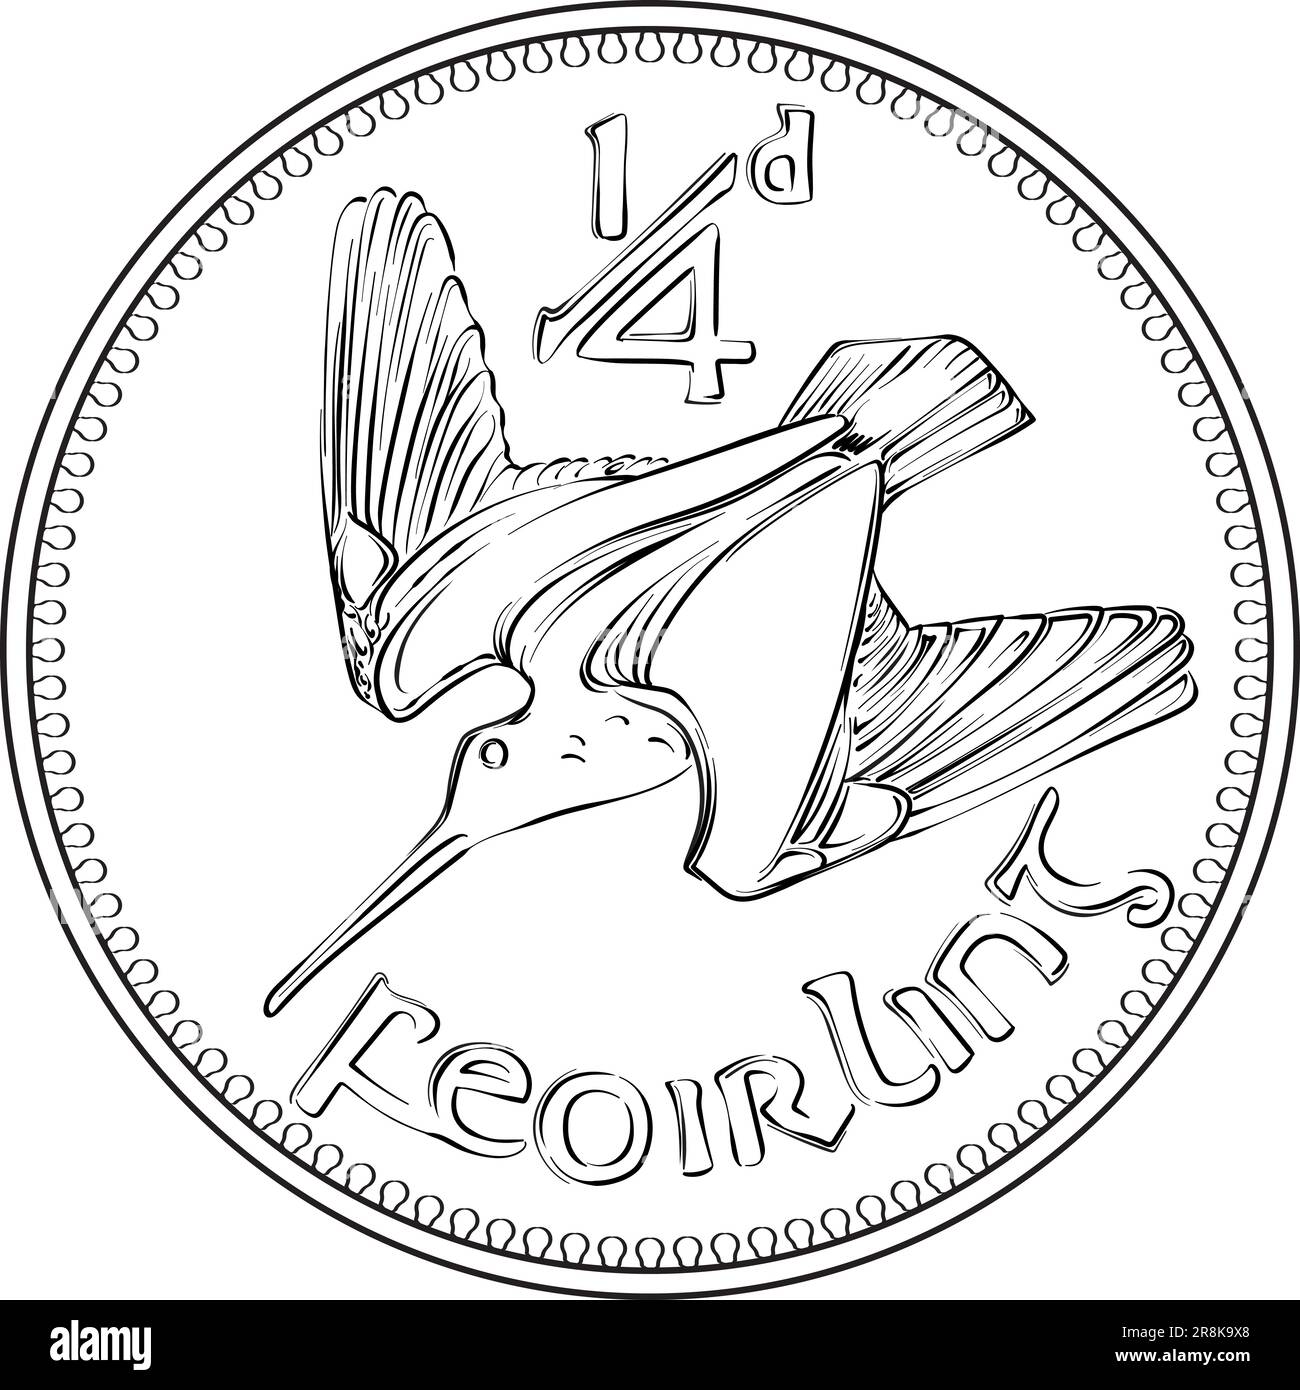 Irish money Pre-decimal gold coin Farthing with woodcock on reverse. Black and white image Stock Vector